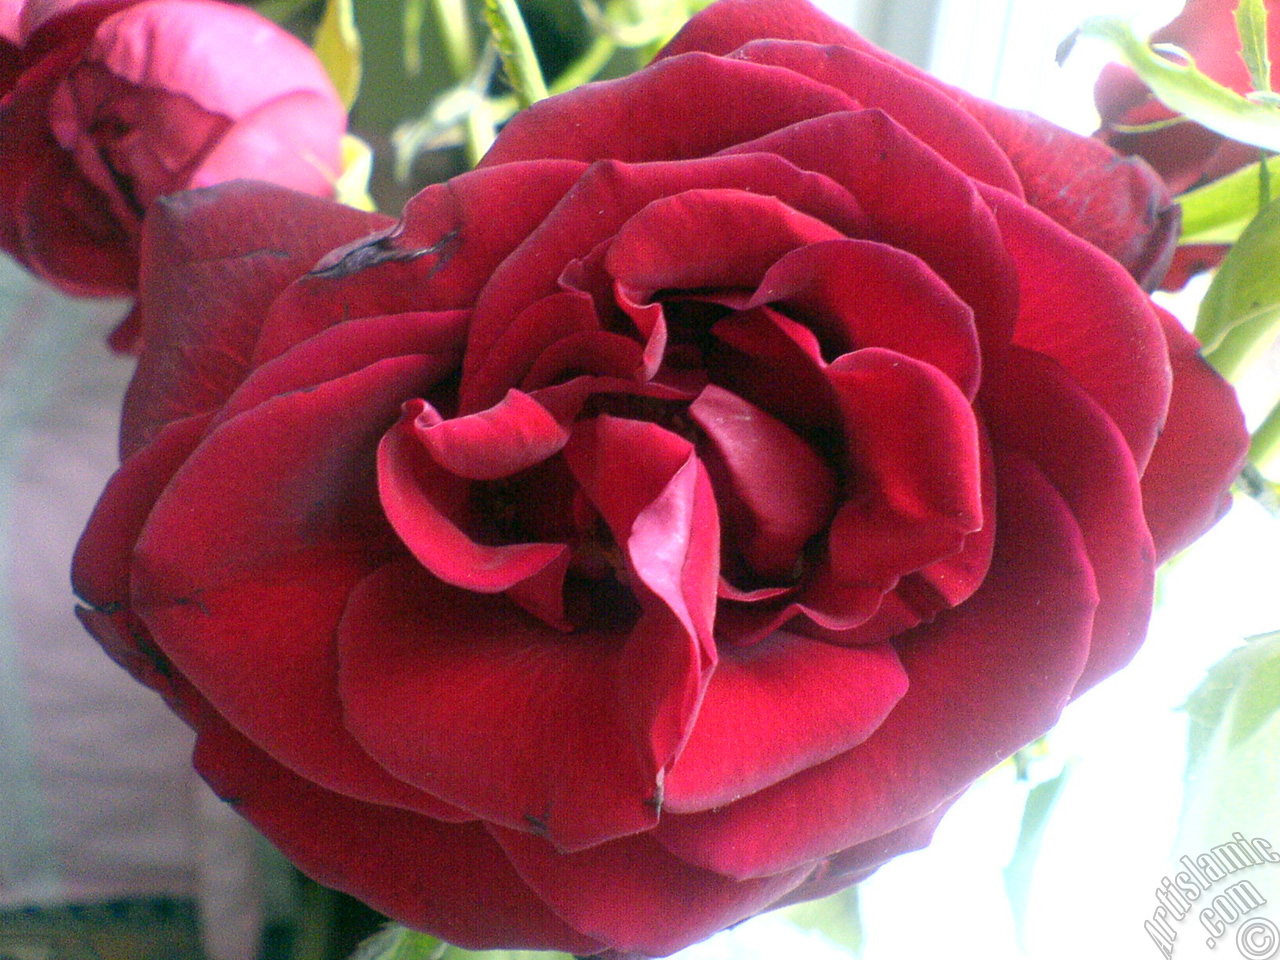 Red rose photo.
